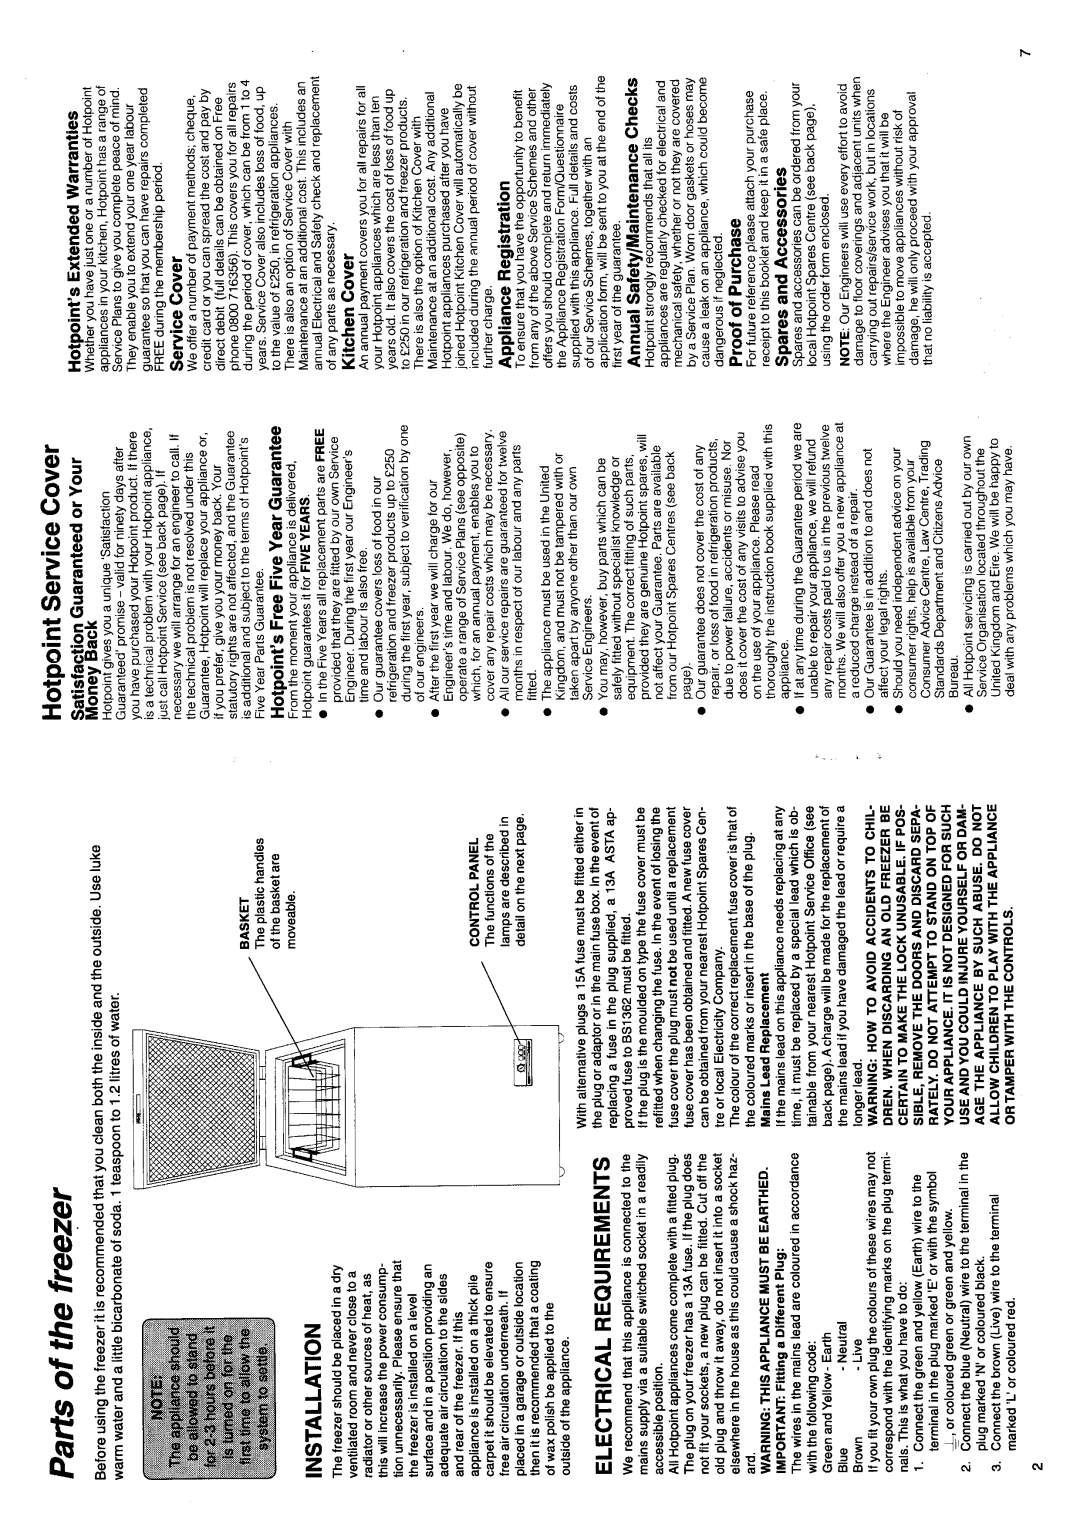 Hotpoint RC10 manual 